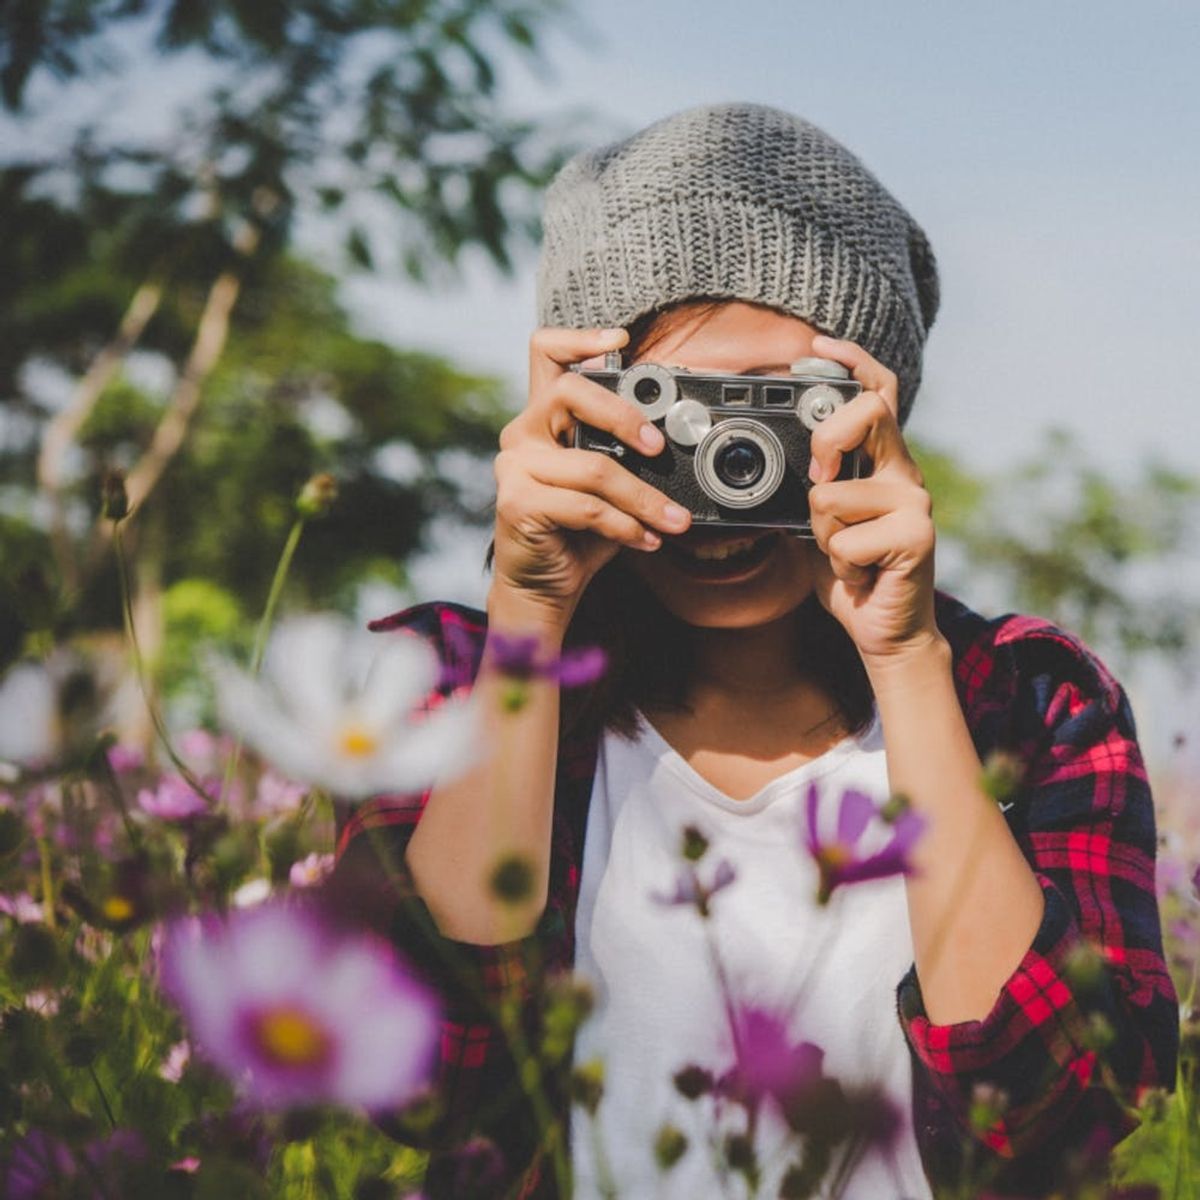 10 Creative Ways to Spend More Time Outside This Spring